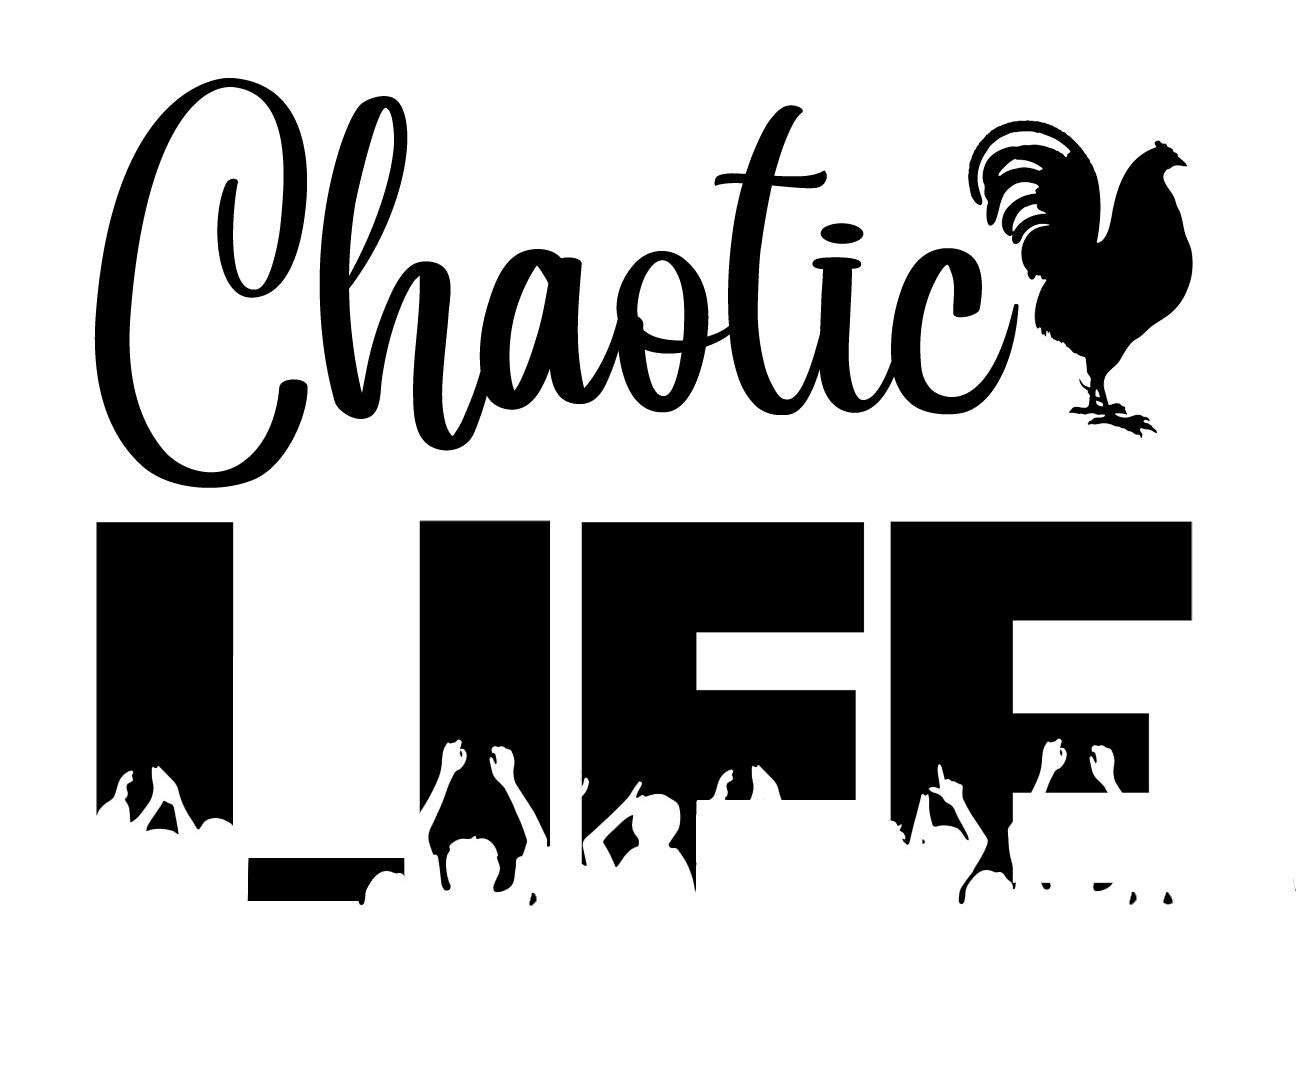 Free Chaotic Life SVG